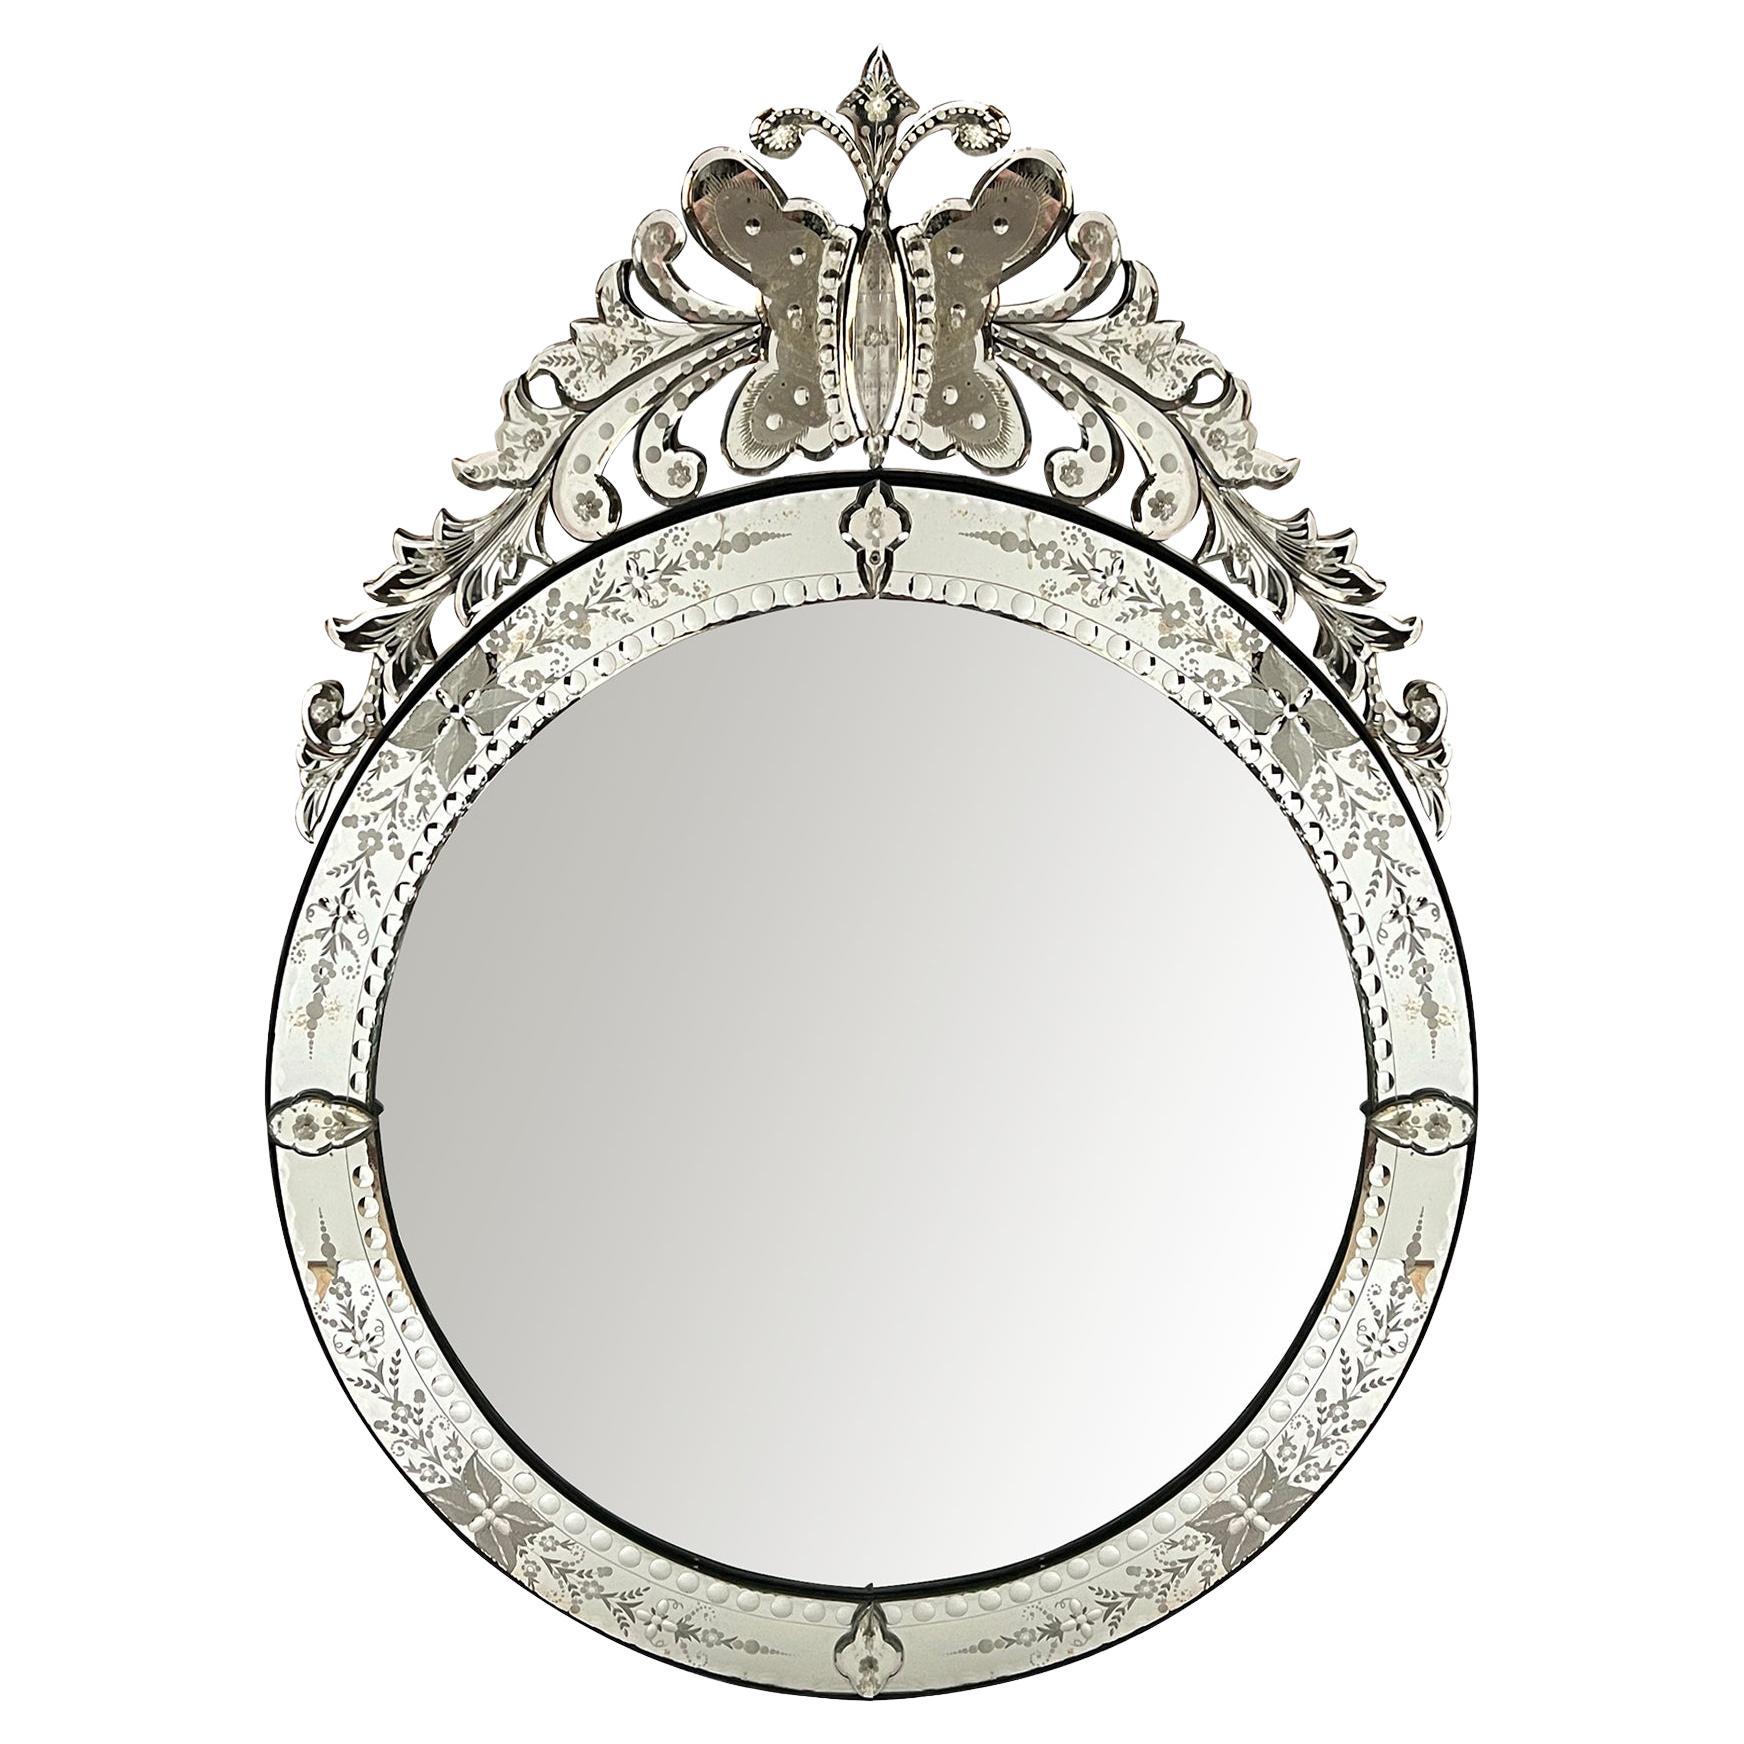 A Custom Venetian Style Circular Mirror with Ornate Butterfly & Floral Crest 